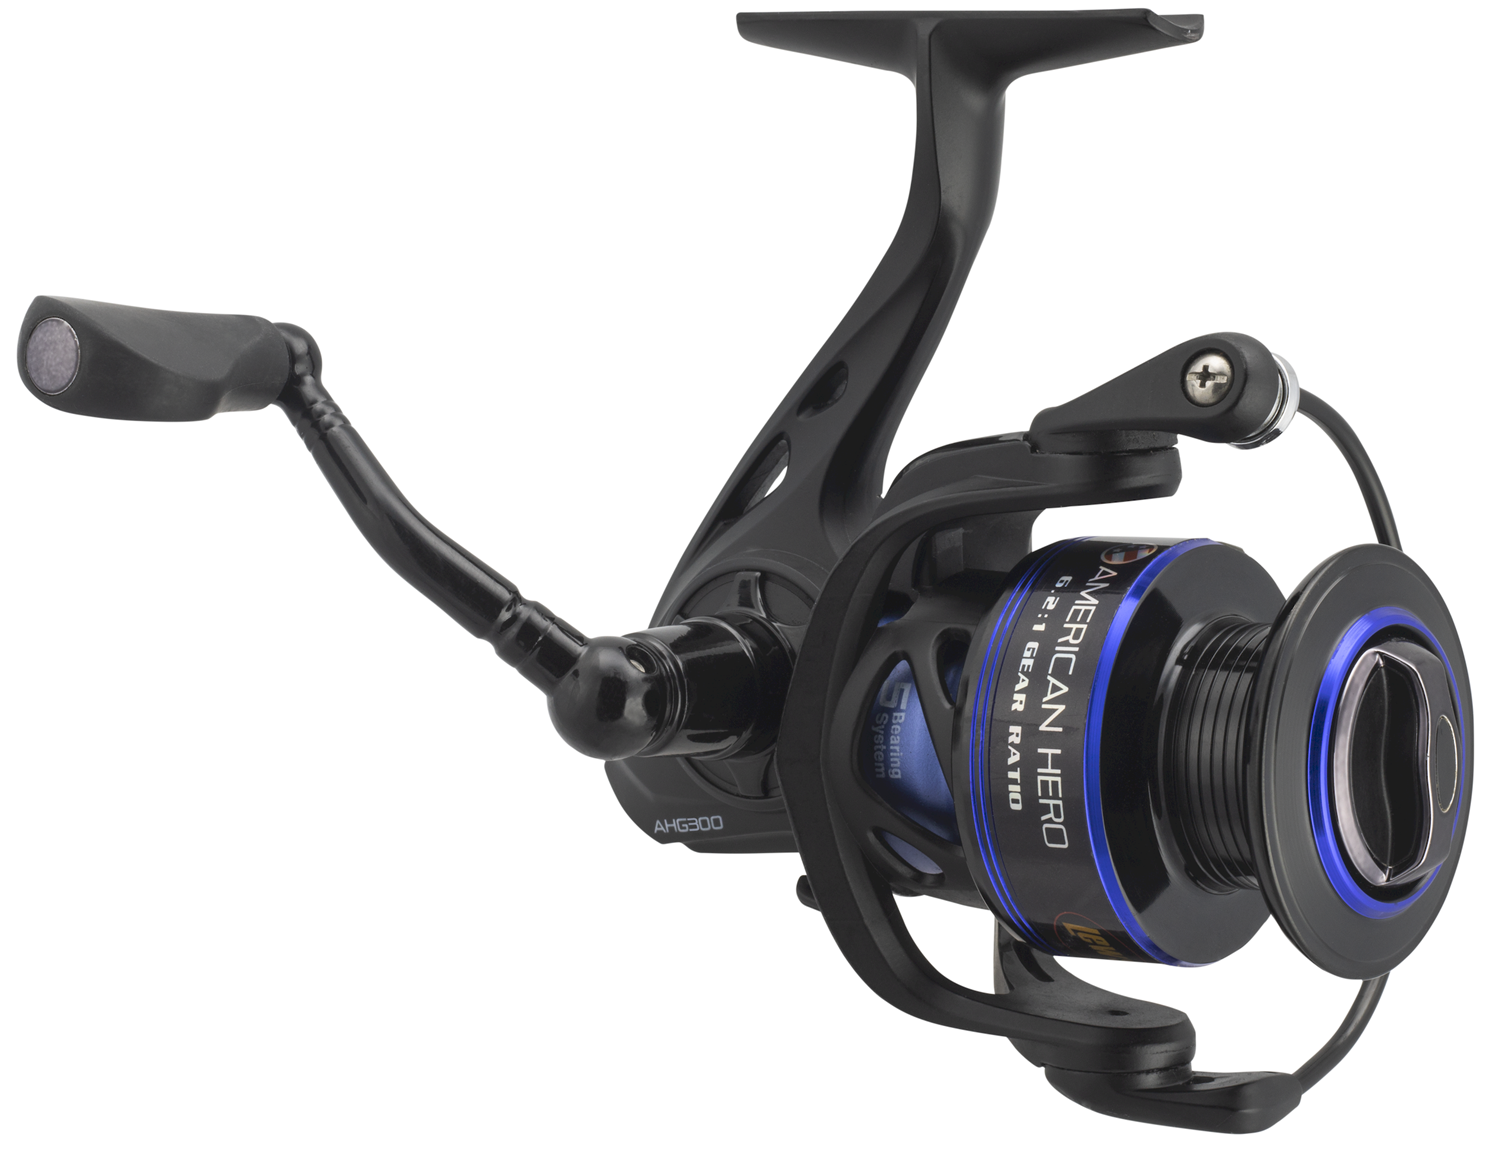 Lew's American Hero Speed Spin Ambidextrous Spinning Reel